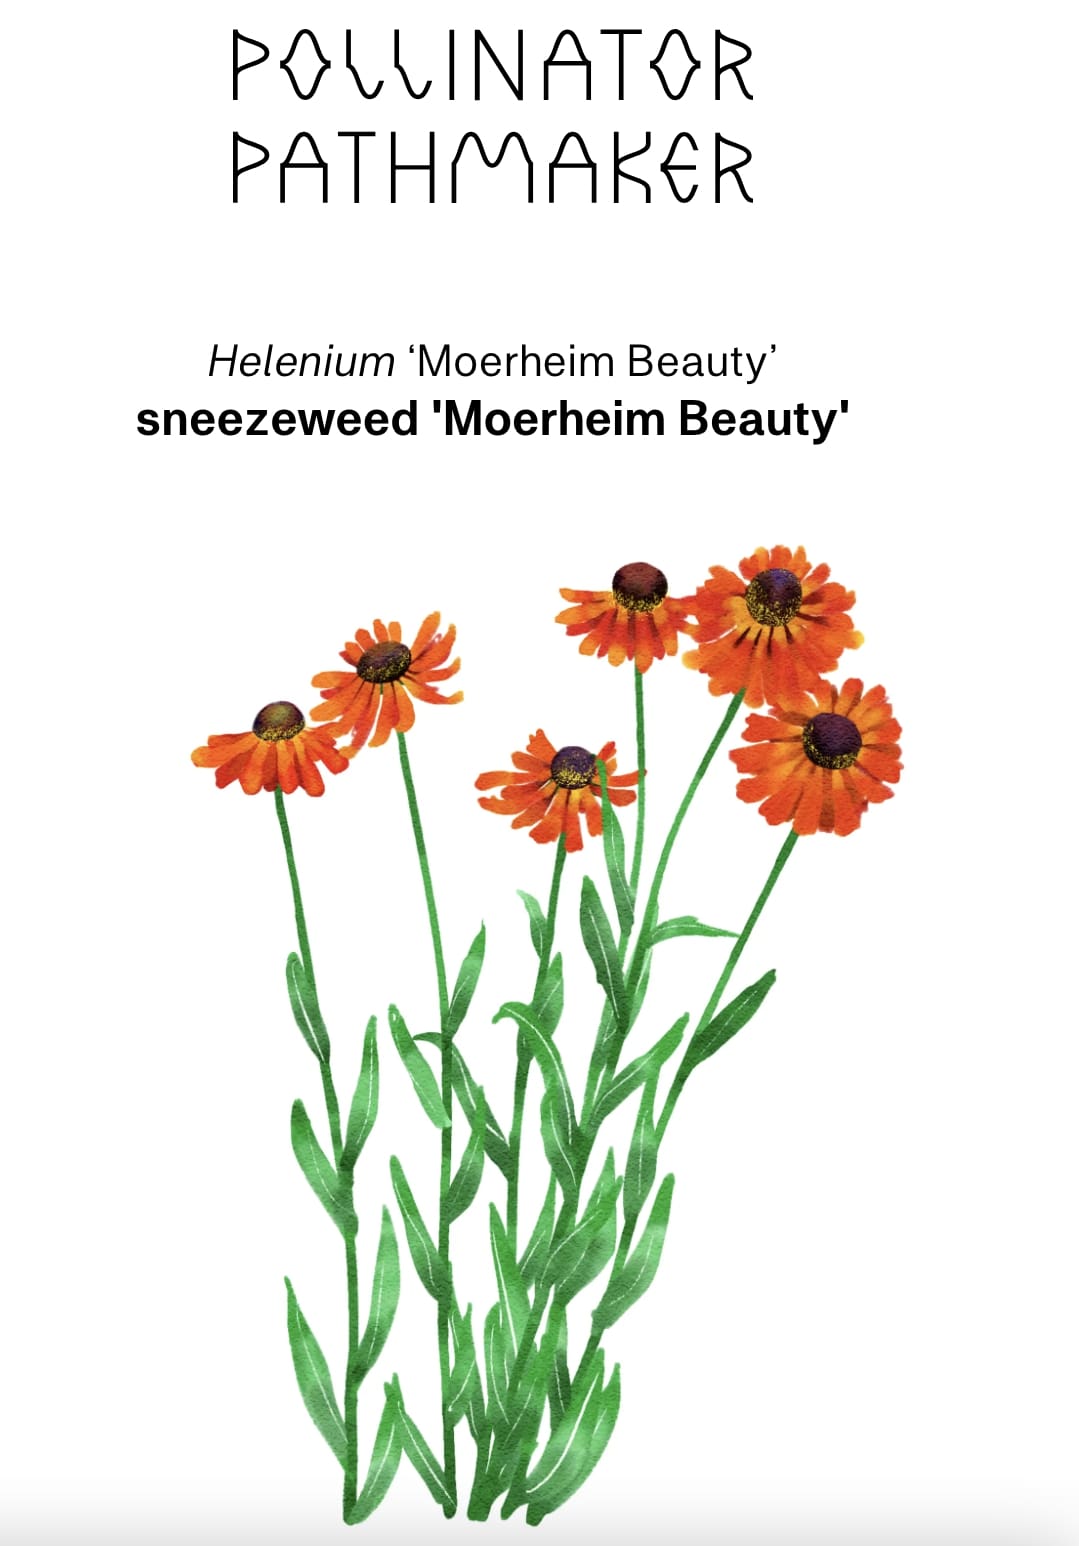 A screenshot of a webpage from a site titled 'Pollinator Pathmaker', featuring a drawing of a sneezeweed labeled with its Latin and informal names